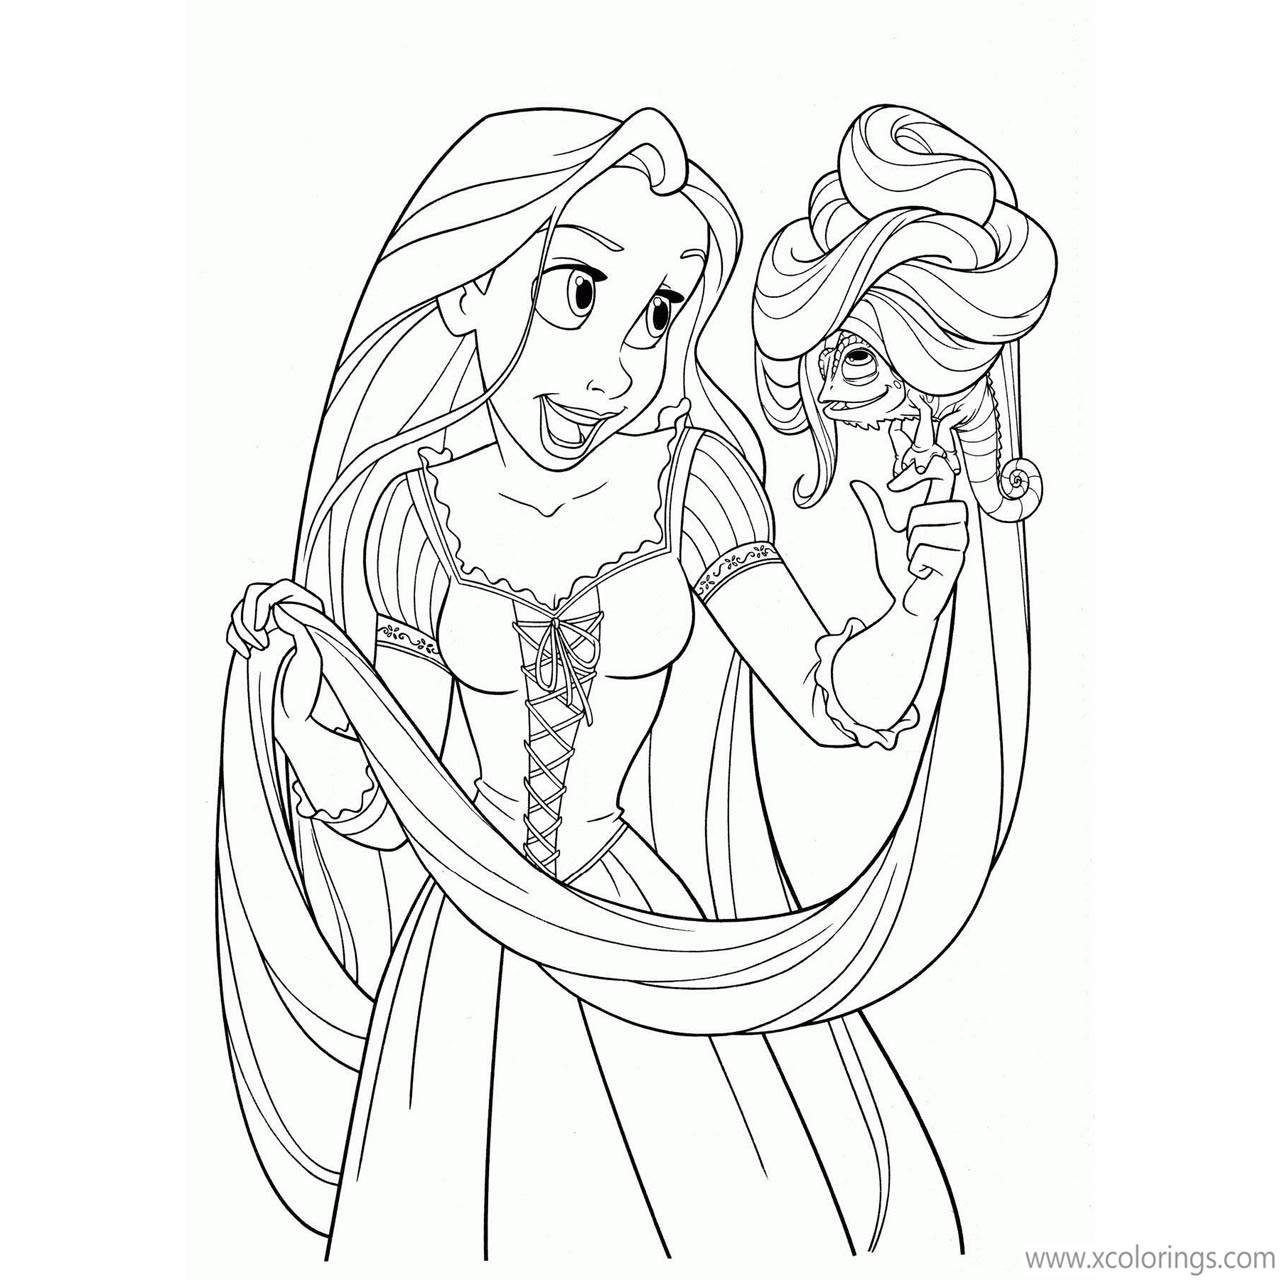 Free Rapunzel is Singing Coloring Pages printable